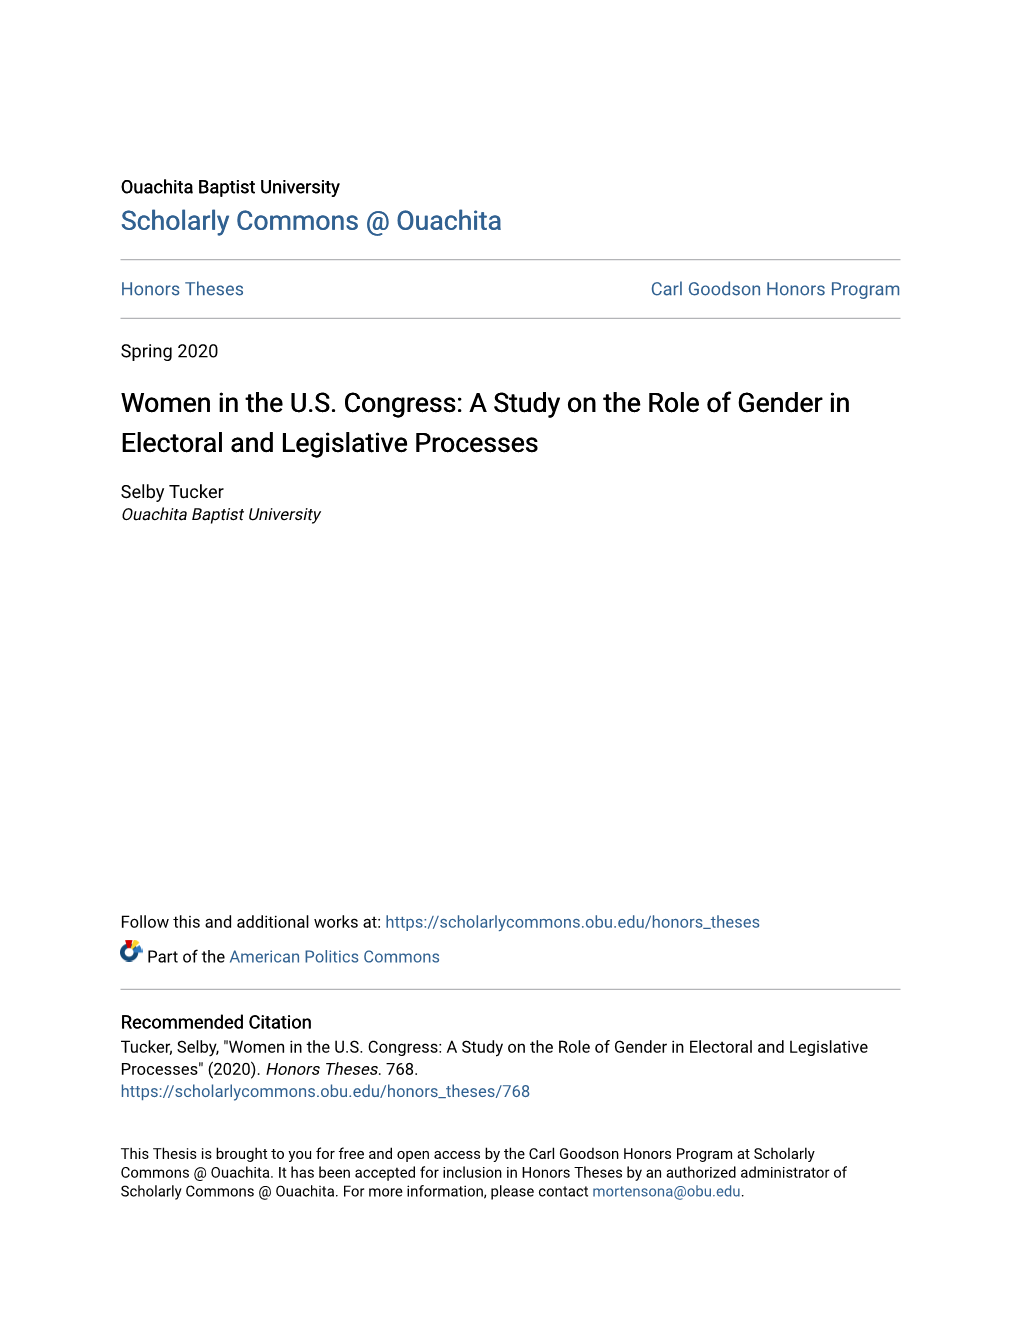 A Study on the Role of Gender in Electoral and Legislative Processes